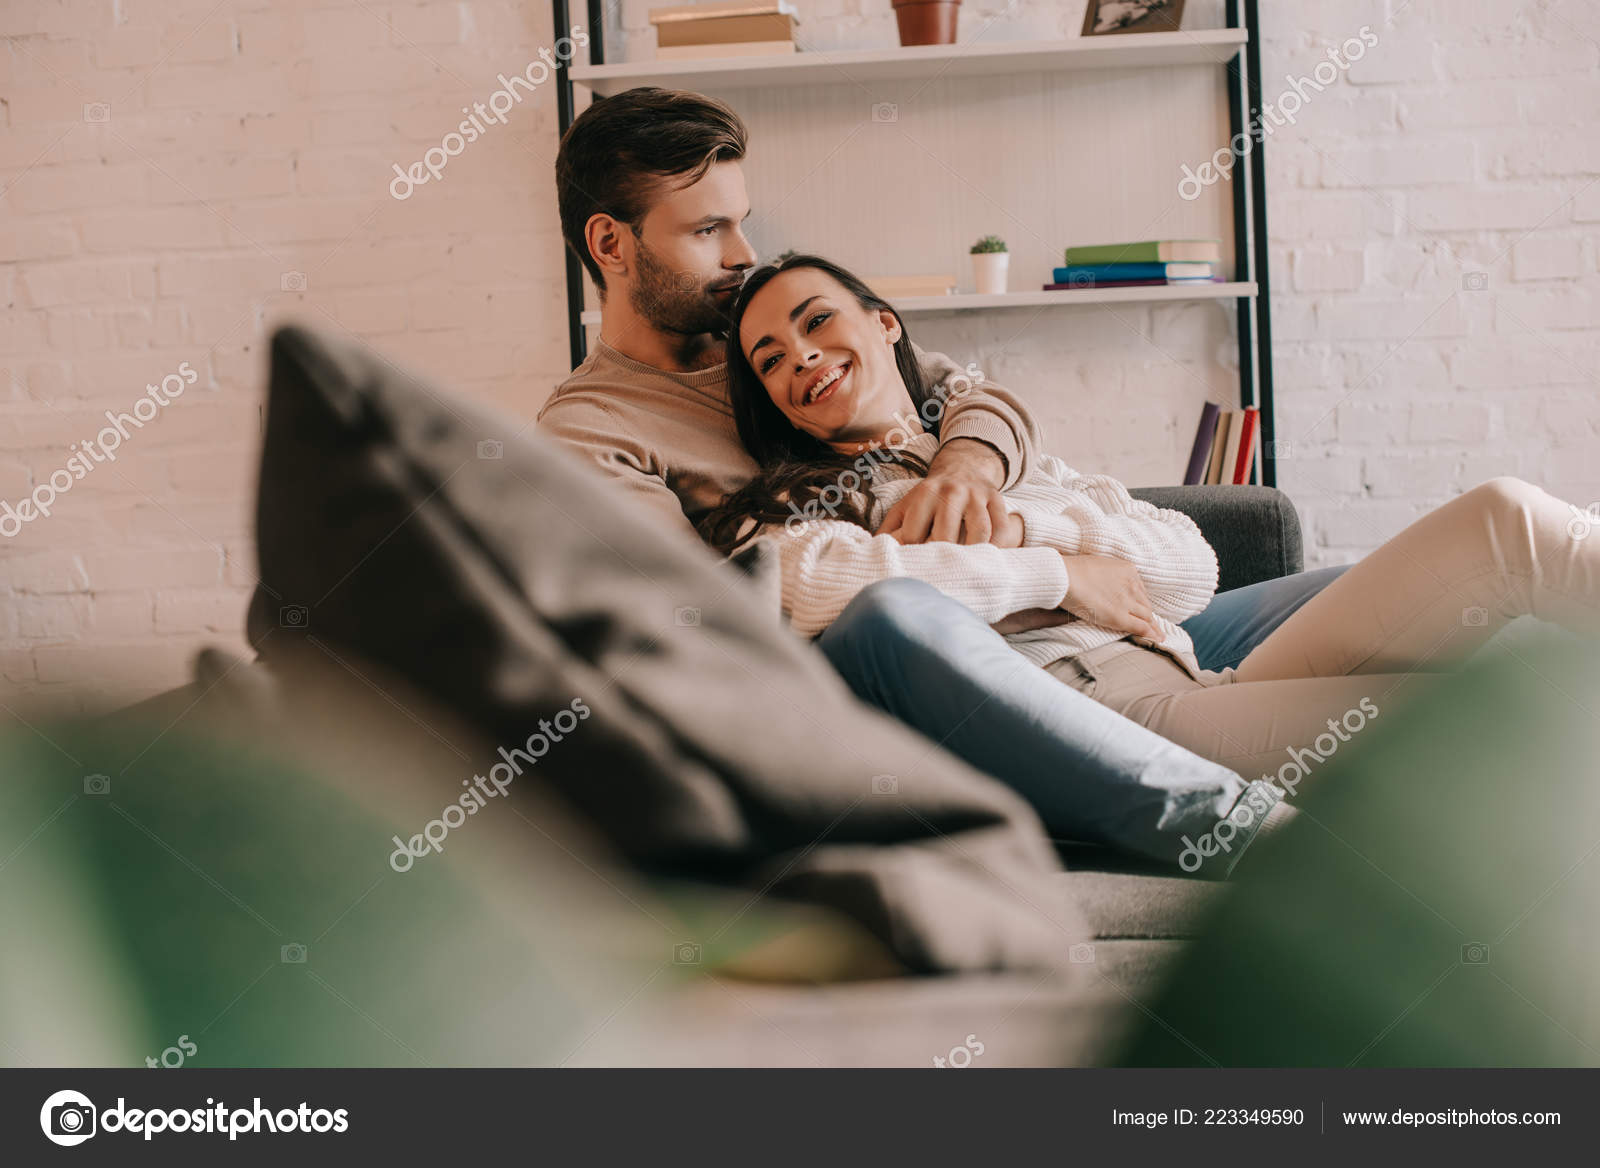 couple cuddling on couch